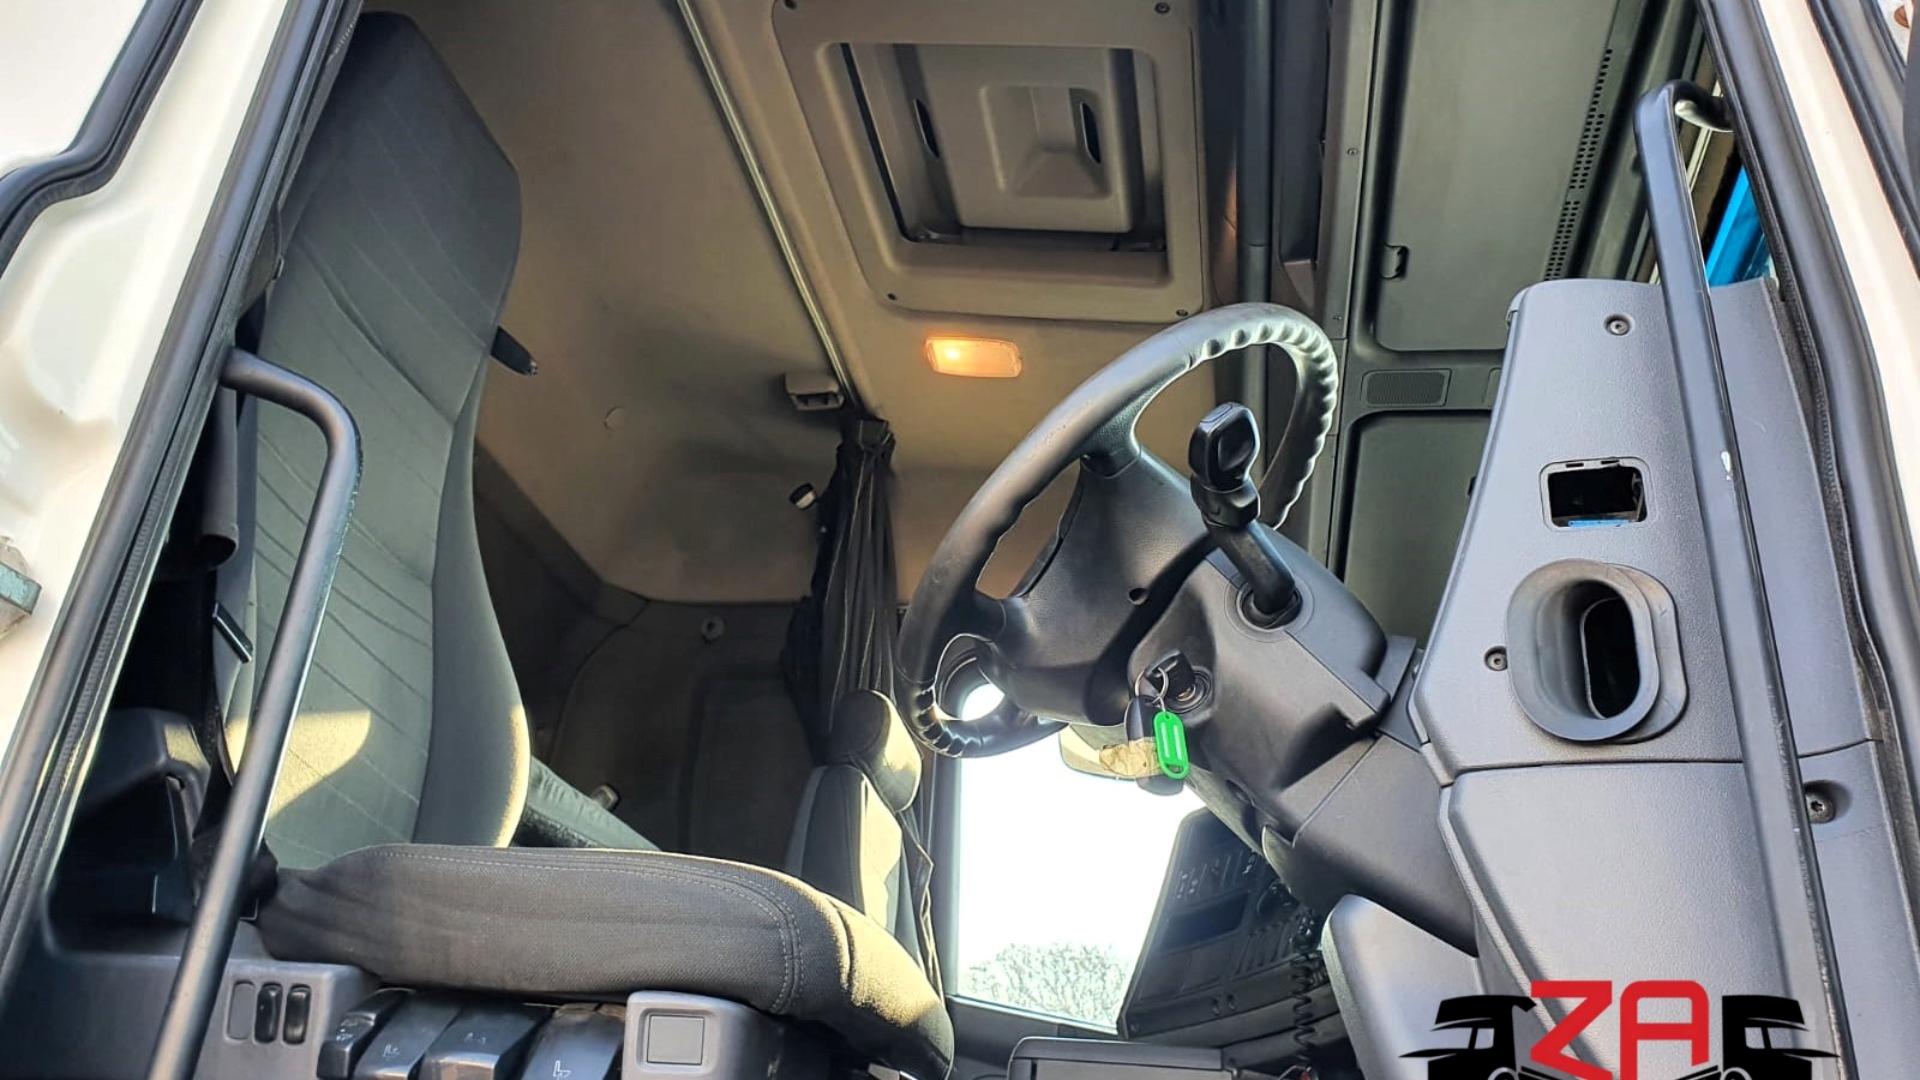 Scania Truck tractors SCANIA G460 TRUCK 2019 for sale by ZA Trucks and Trailers Sales | Truck & Trailer Marketplace